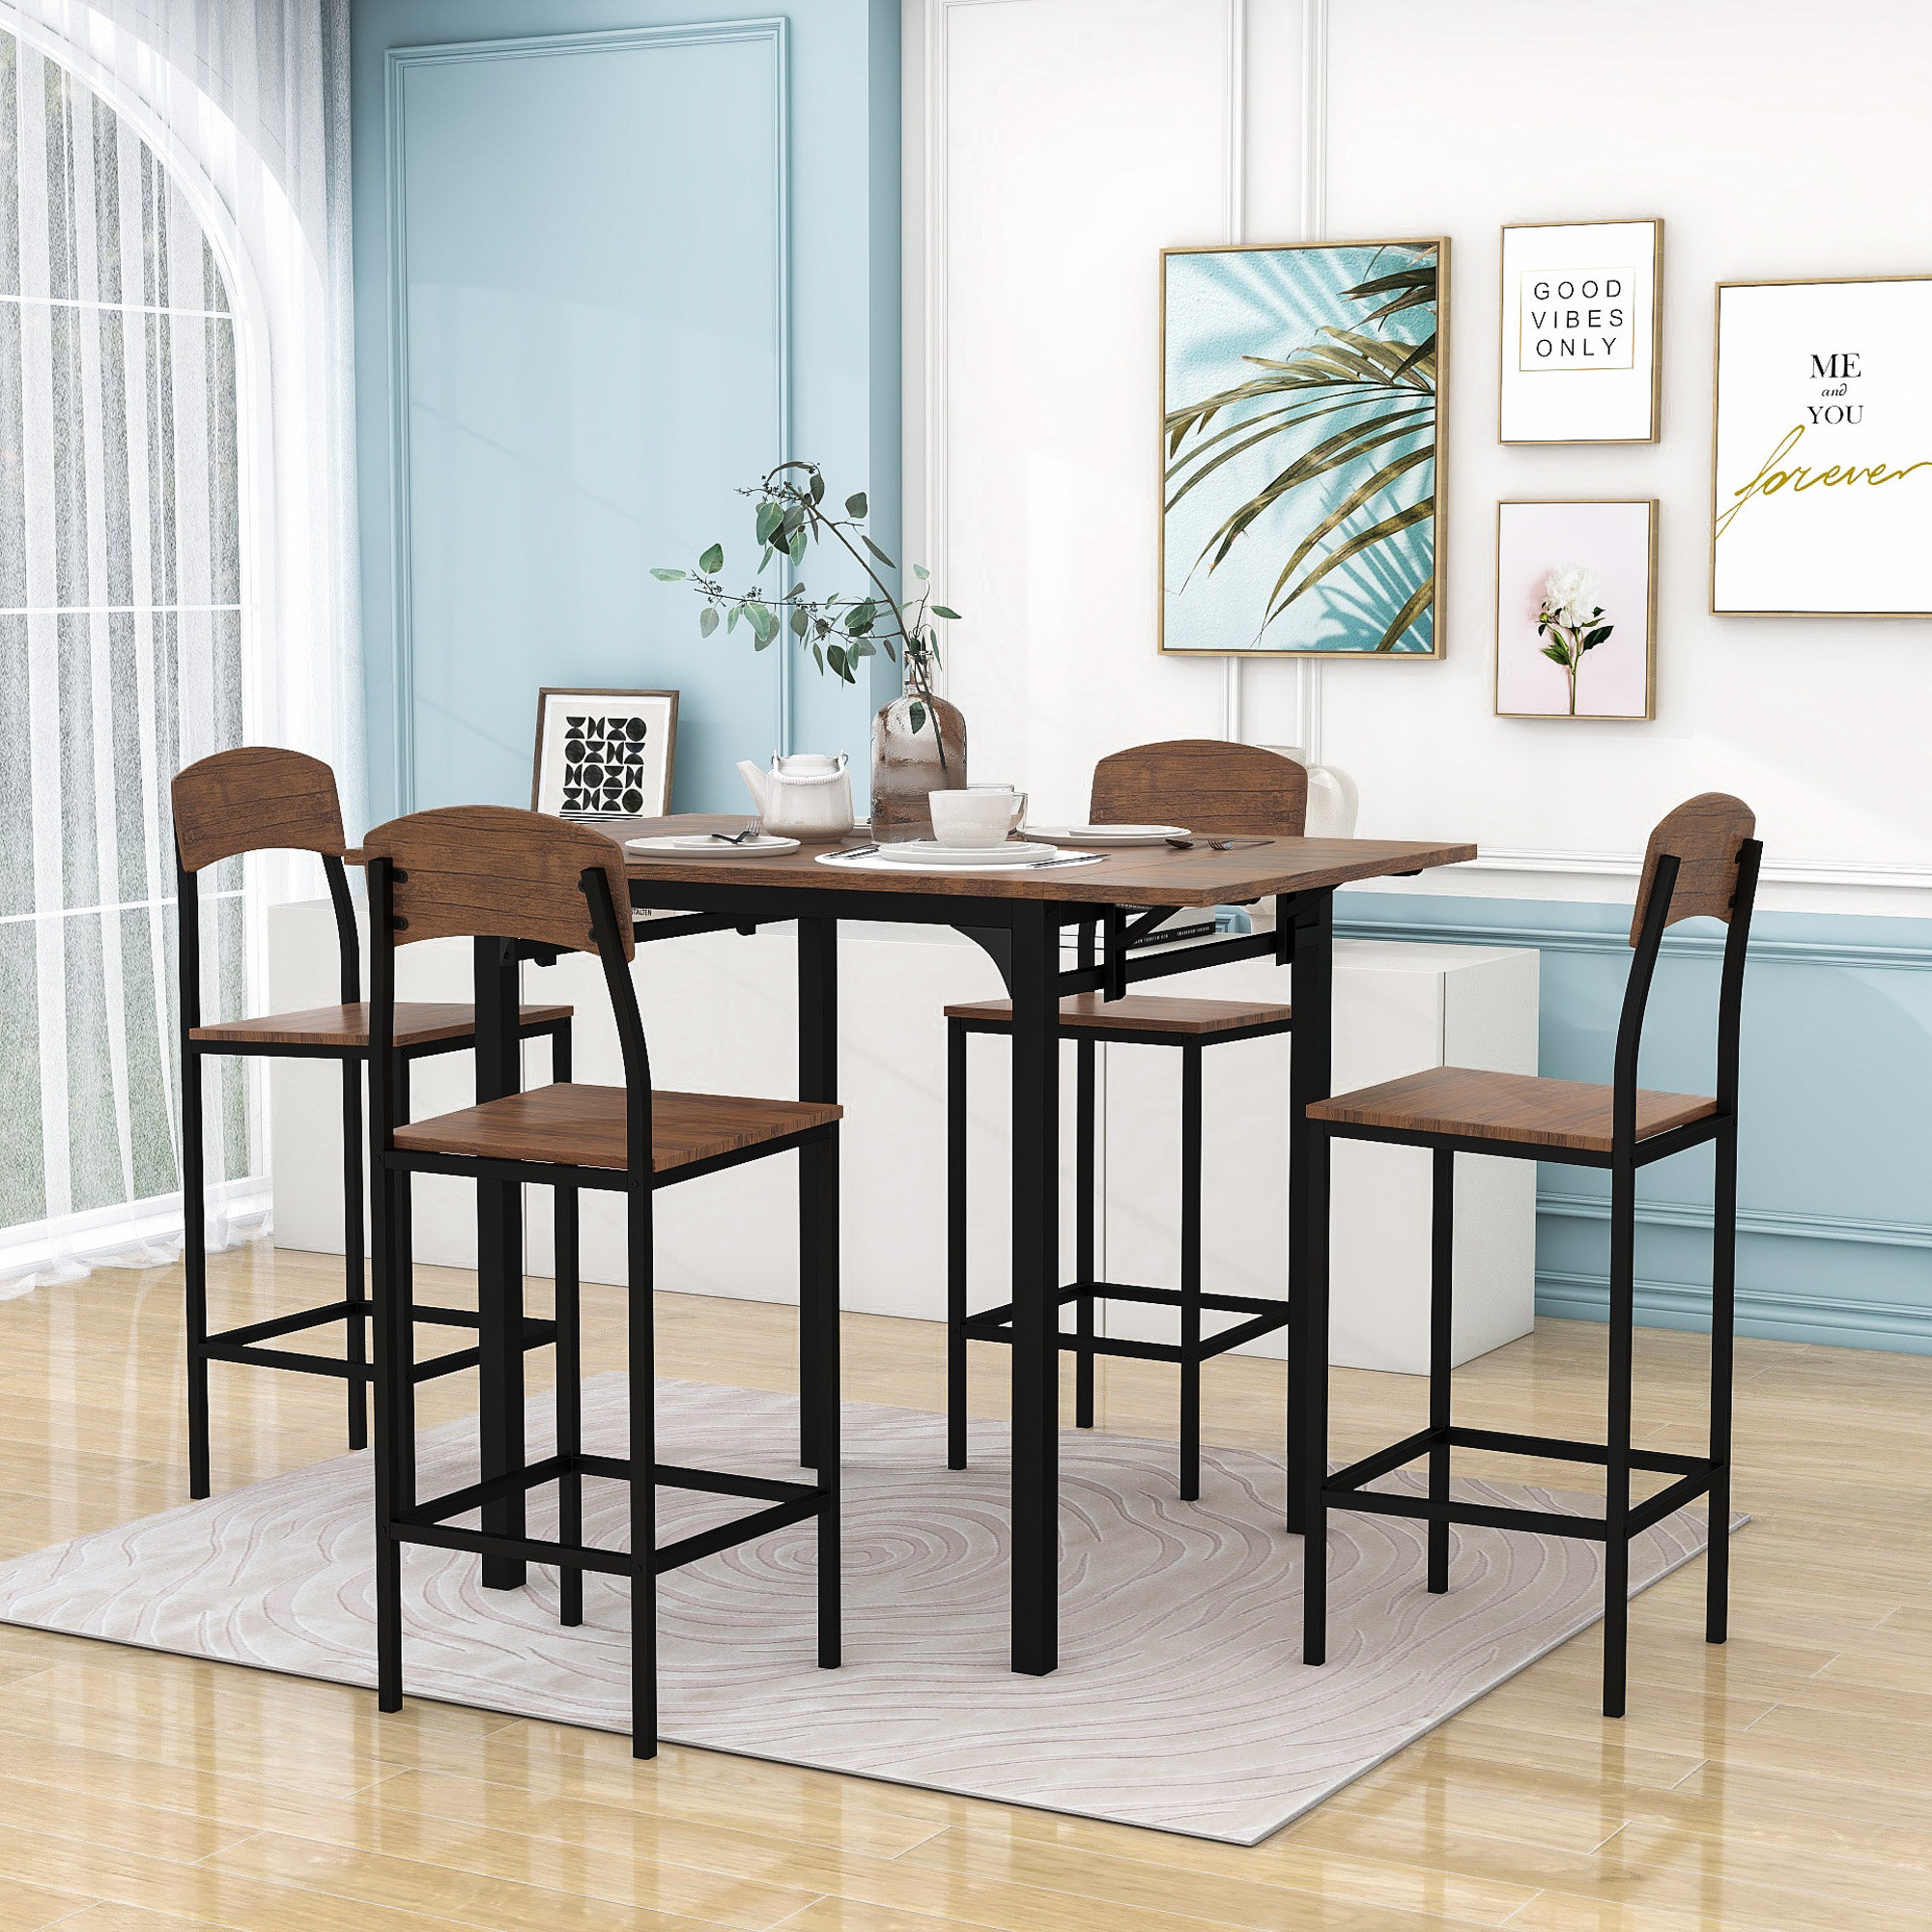 17 Stories Shanque Height Drop Set Person | - Counter Wayfair 4 Dining Leaf